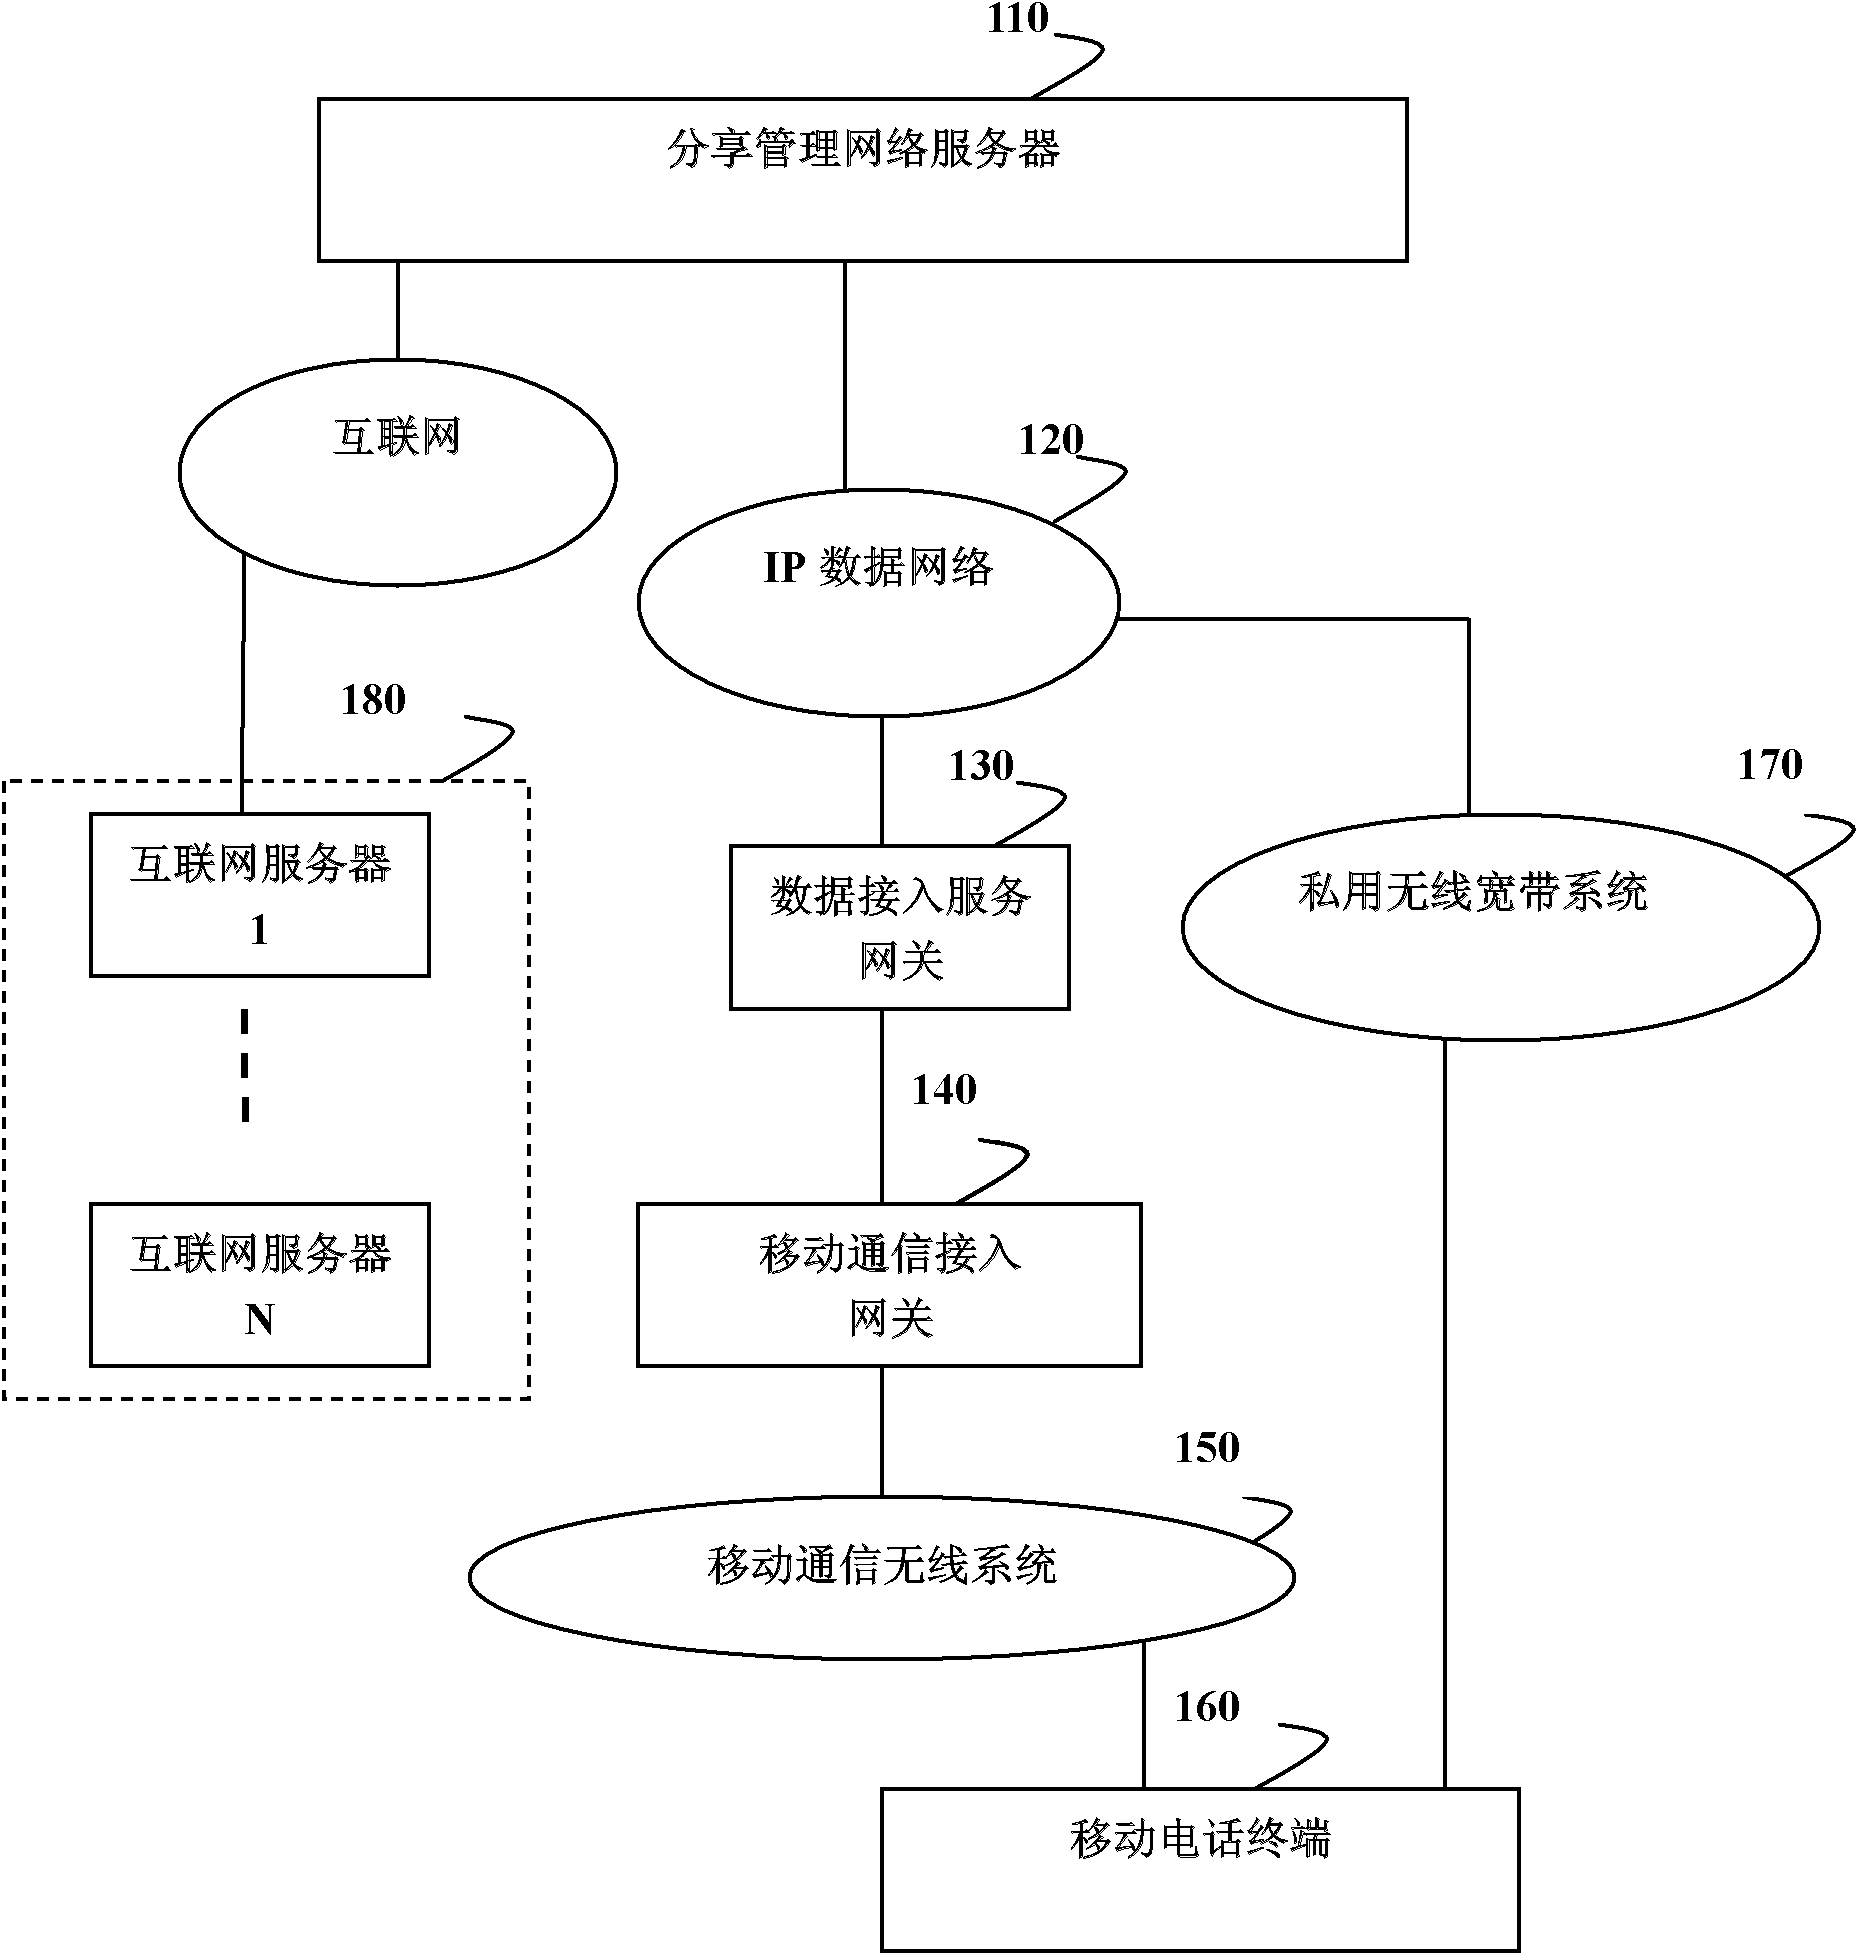 Method and system for sharing webpage or multimedia information